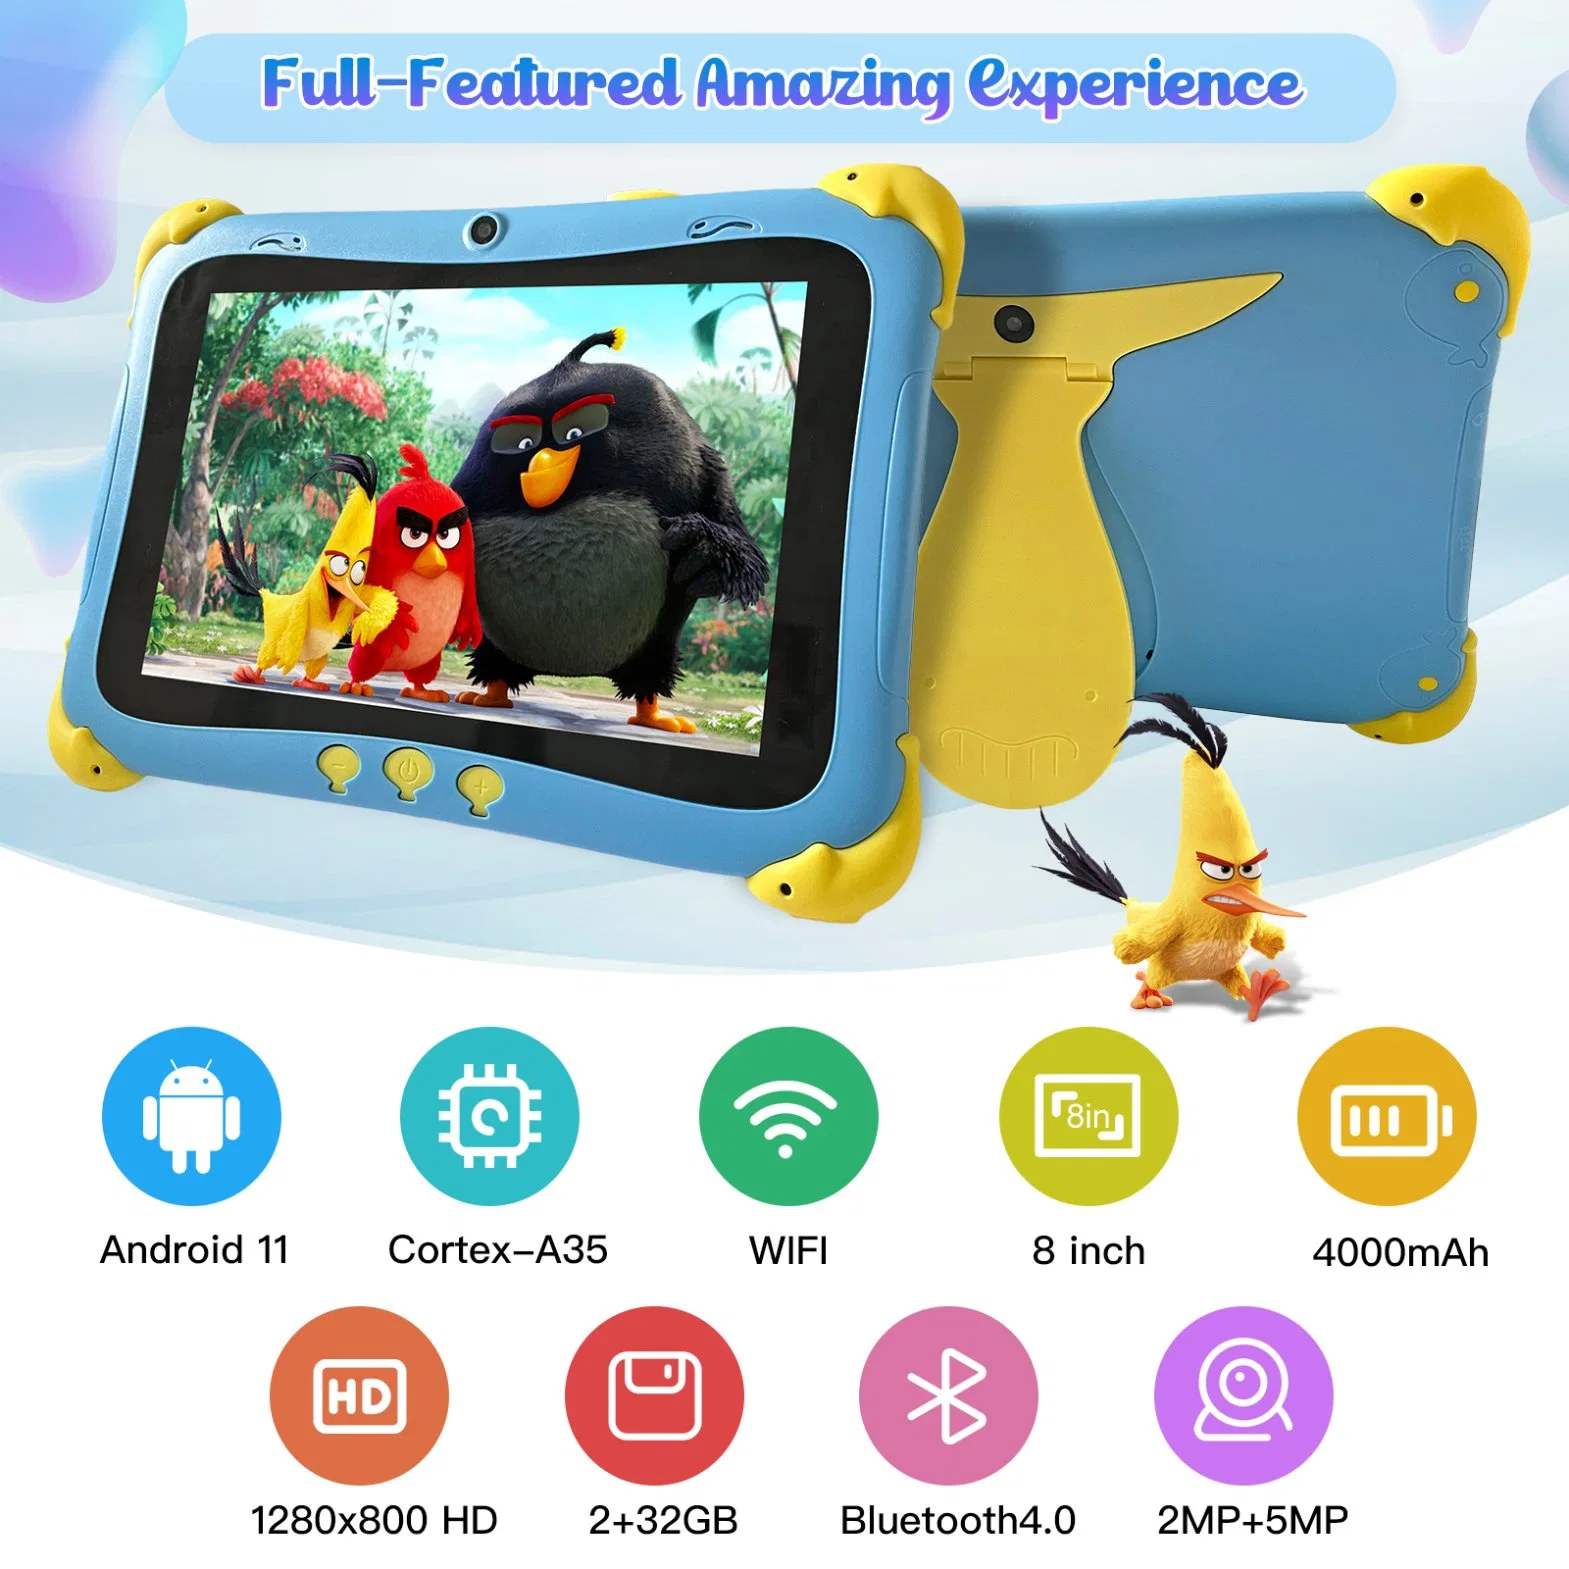 New 8 Inch Gms Android 11.0 WiFi Rugged Tablet PC Rk3326 Quad Core for Kids Children Learning Educational Iwawa Tablets